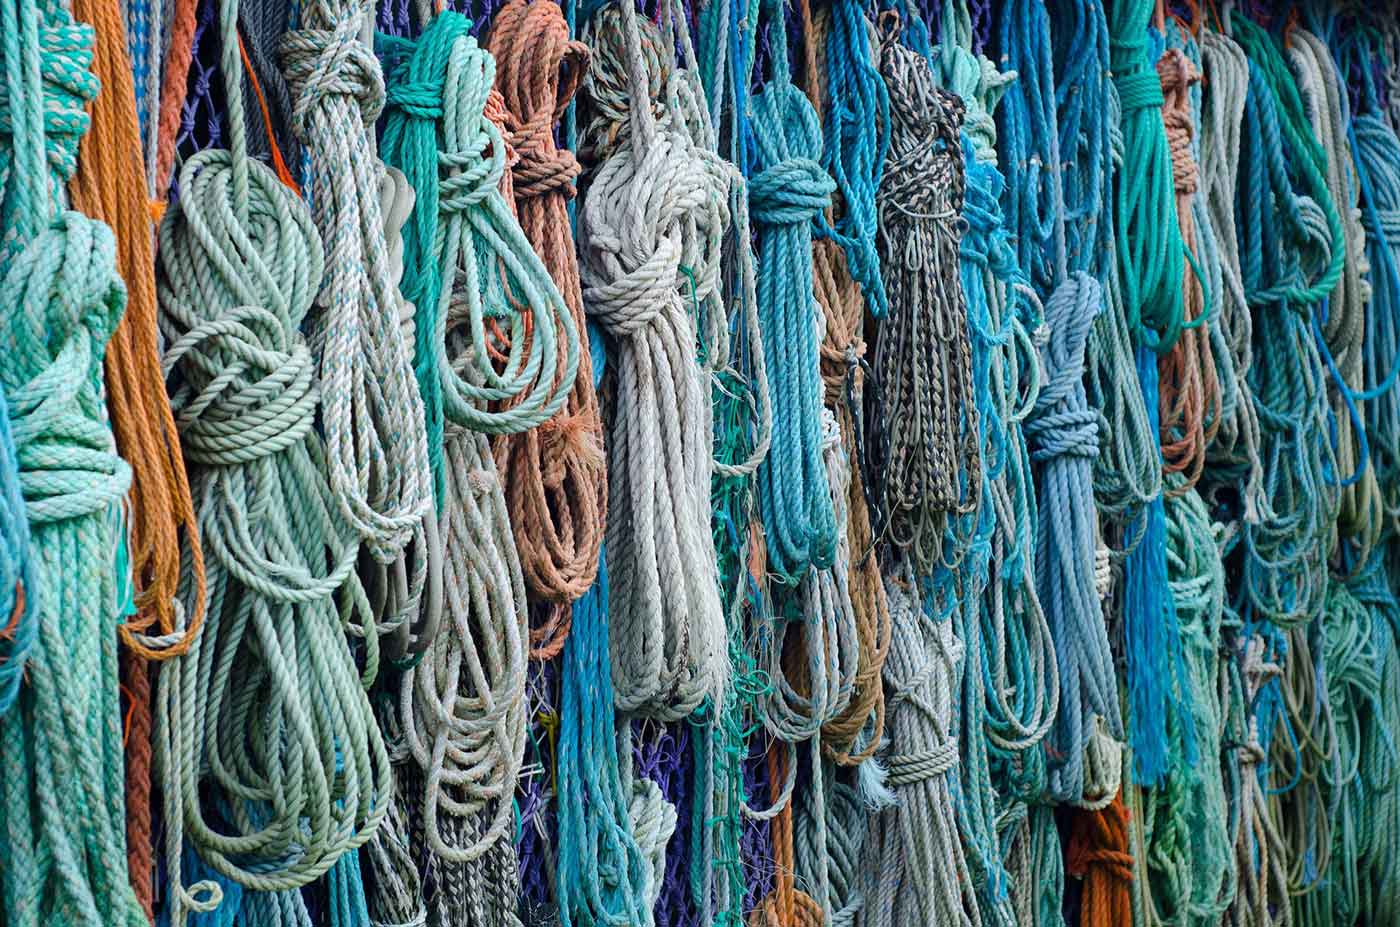 Colored ropes